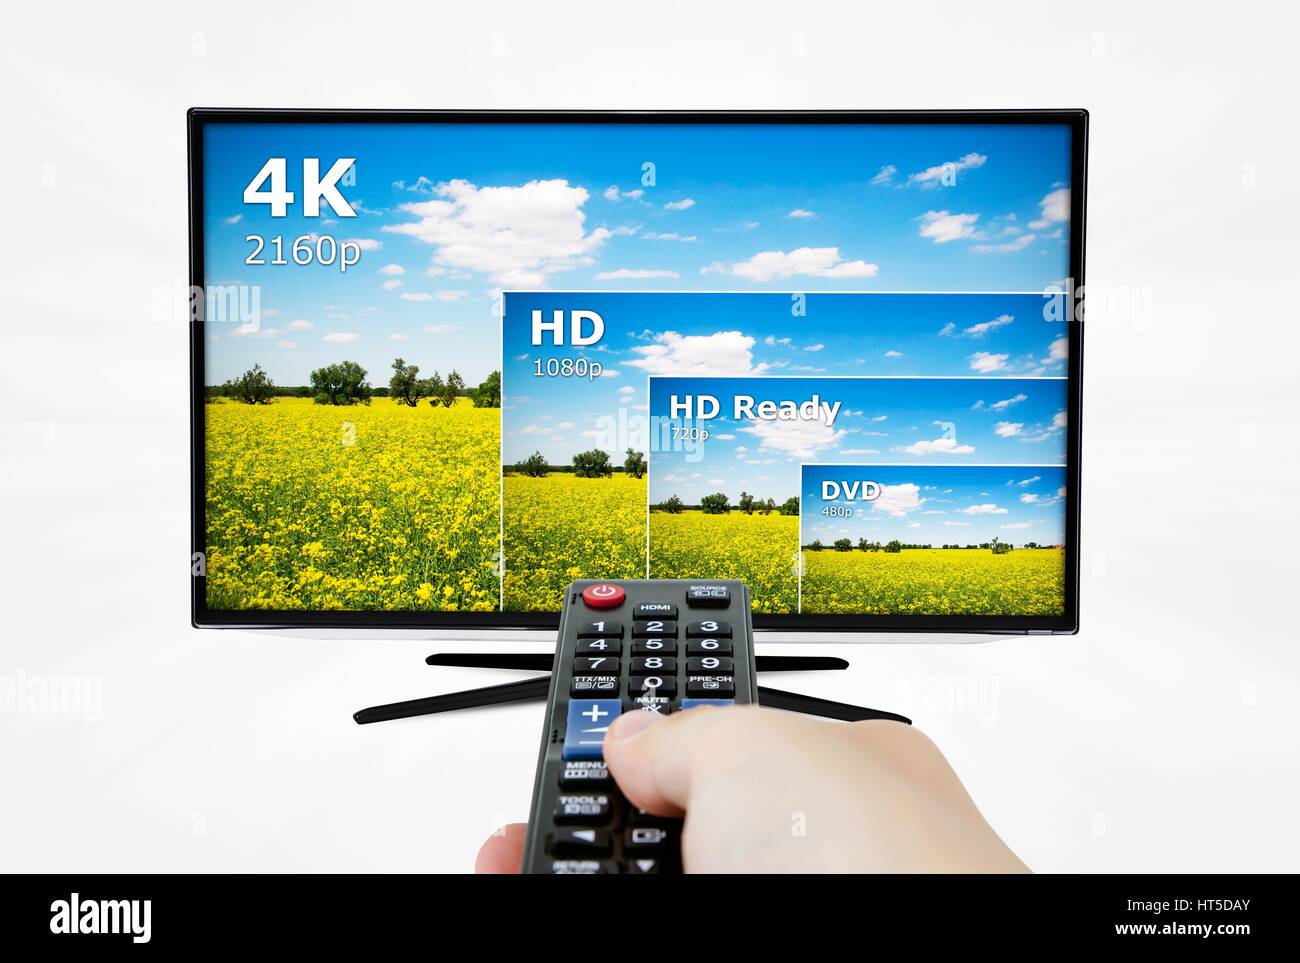 4K television display with comparison of resolutions. Remote control in hand Stock Photo